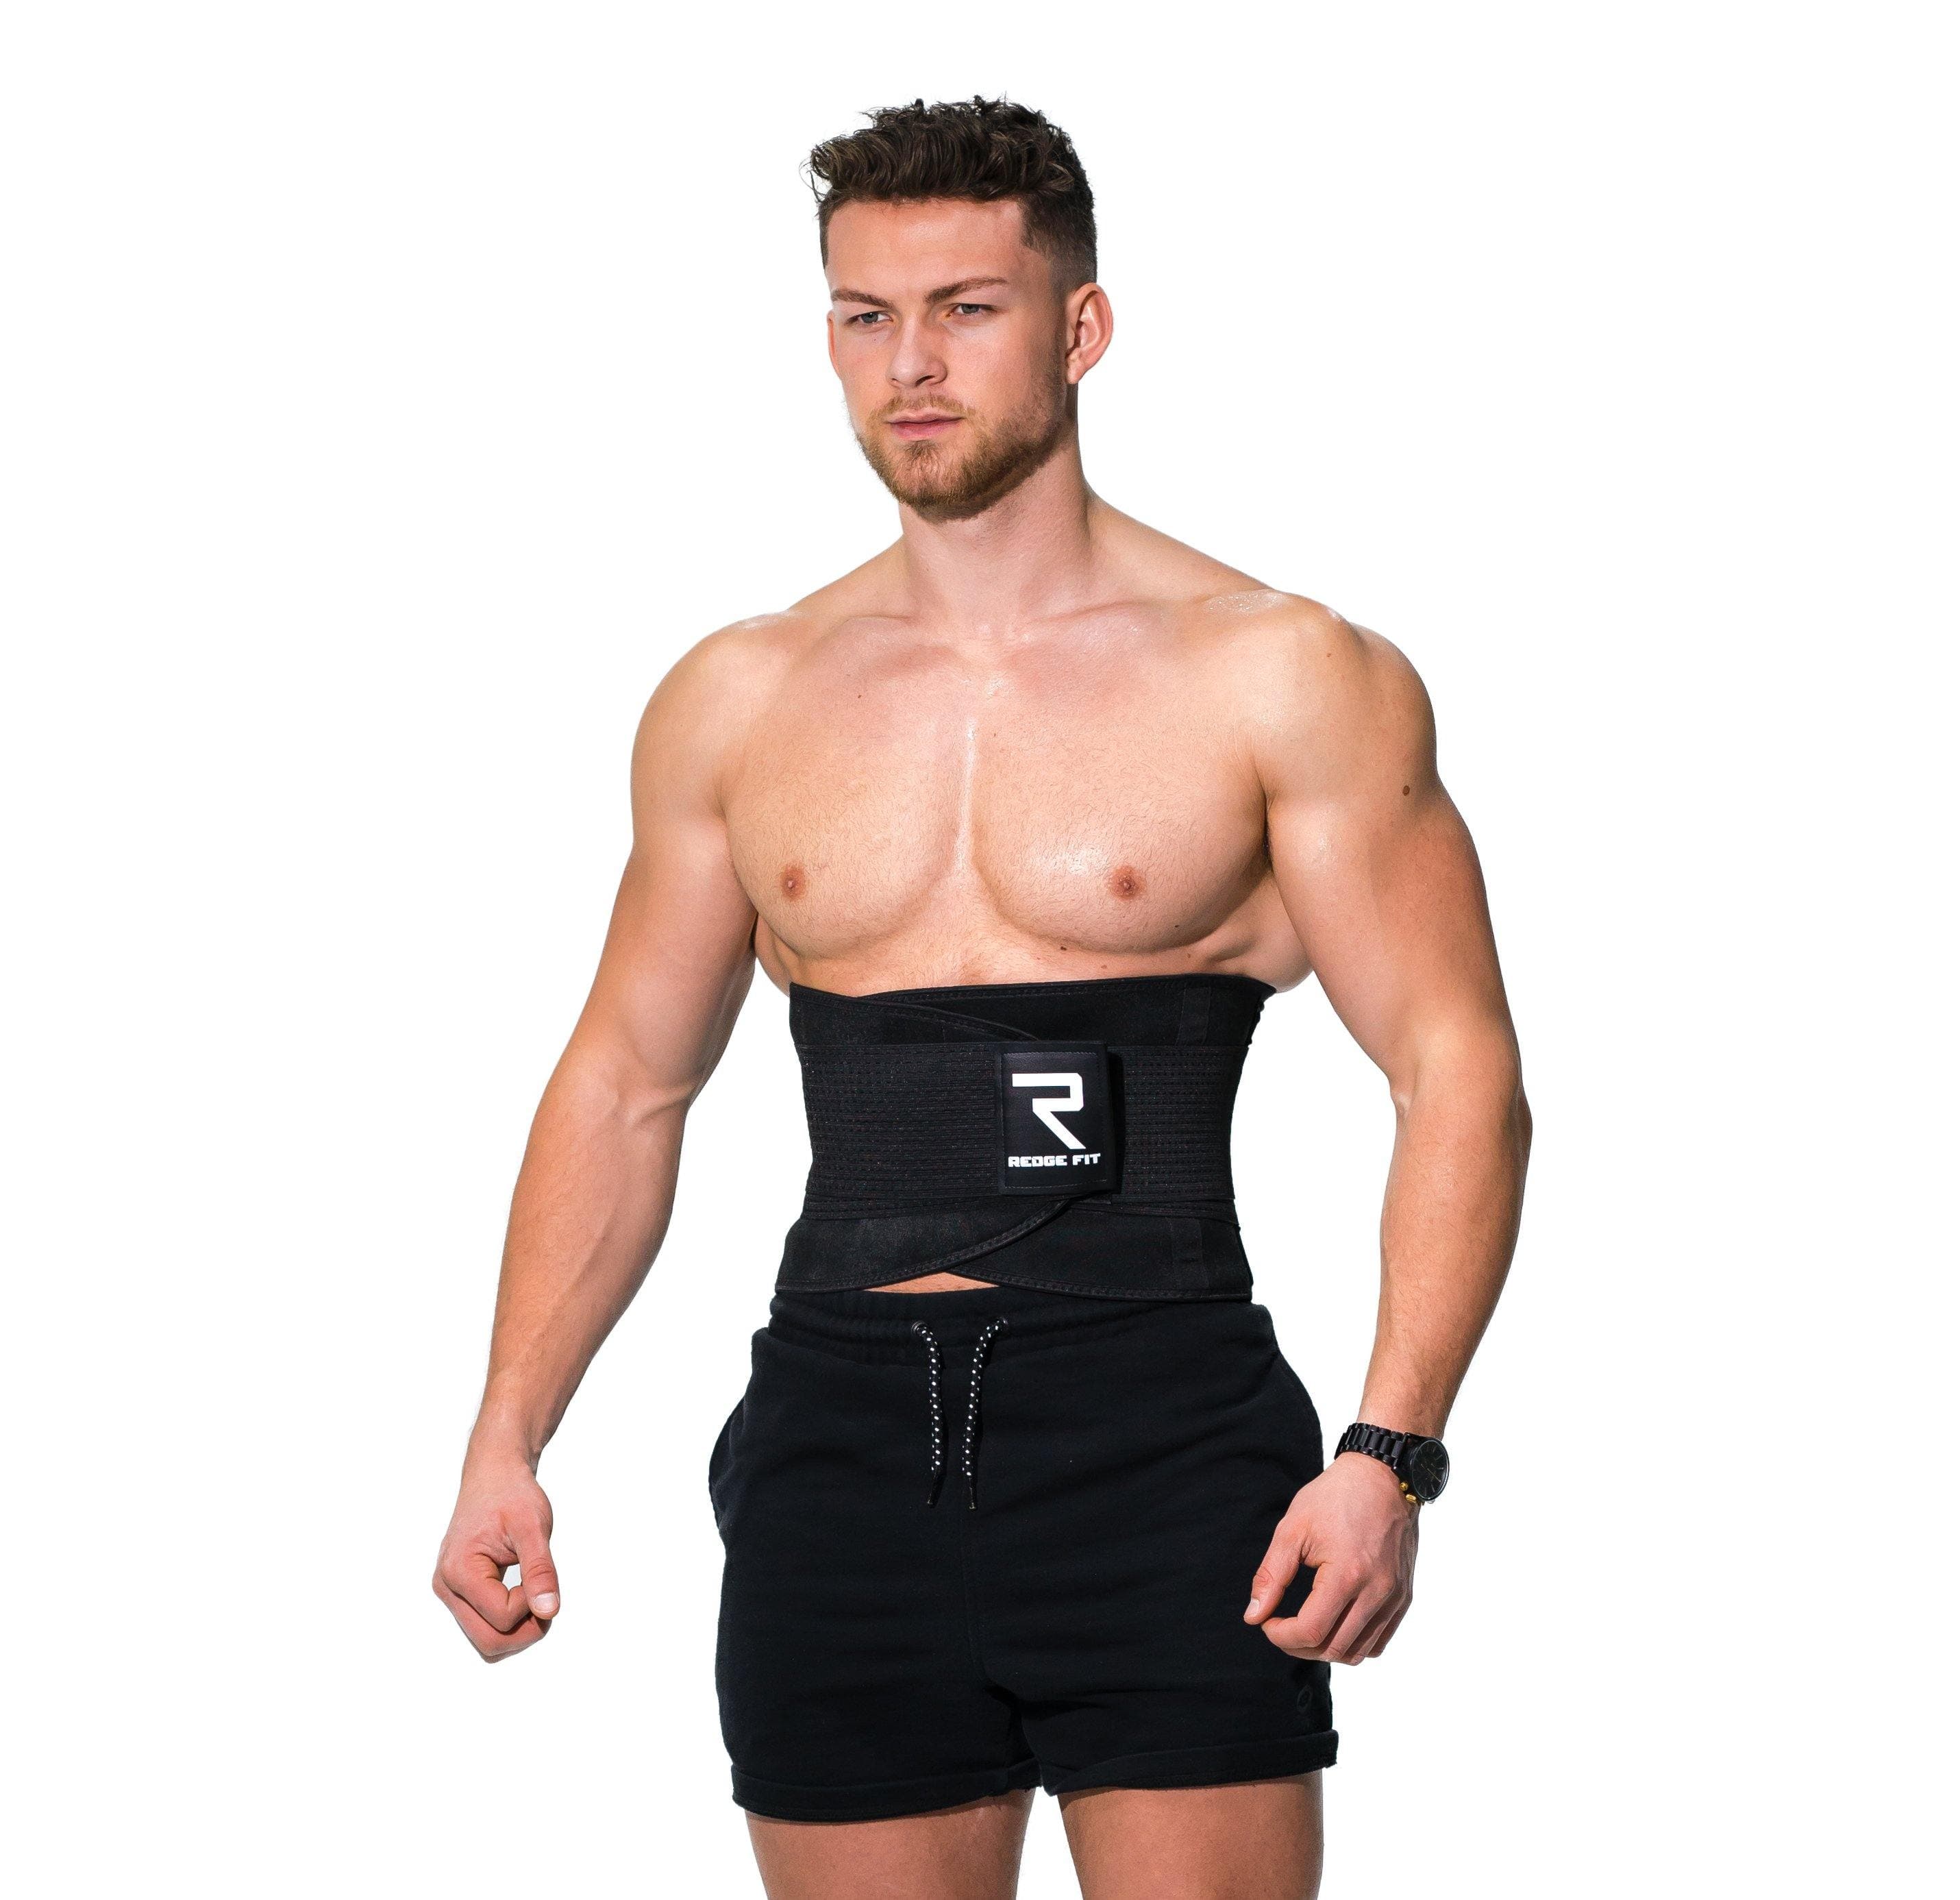 Man modeling the Redge Fit Core Focus Starter Pack Sweat Belt Available at https://www.getredge.com/products/core-focus-all-in-one-pack-1